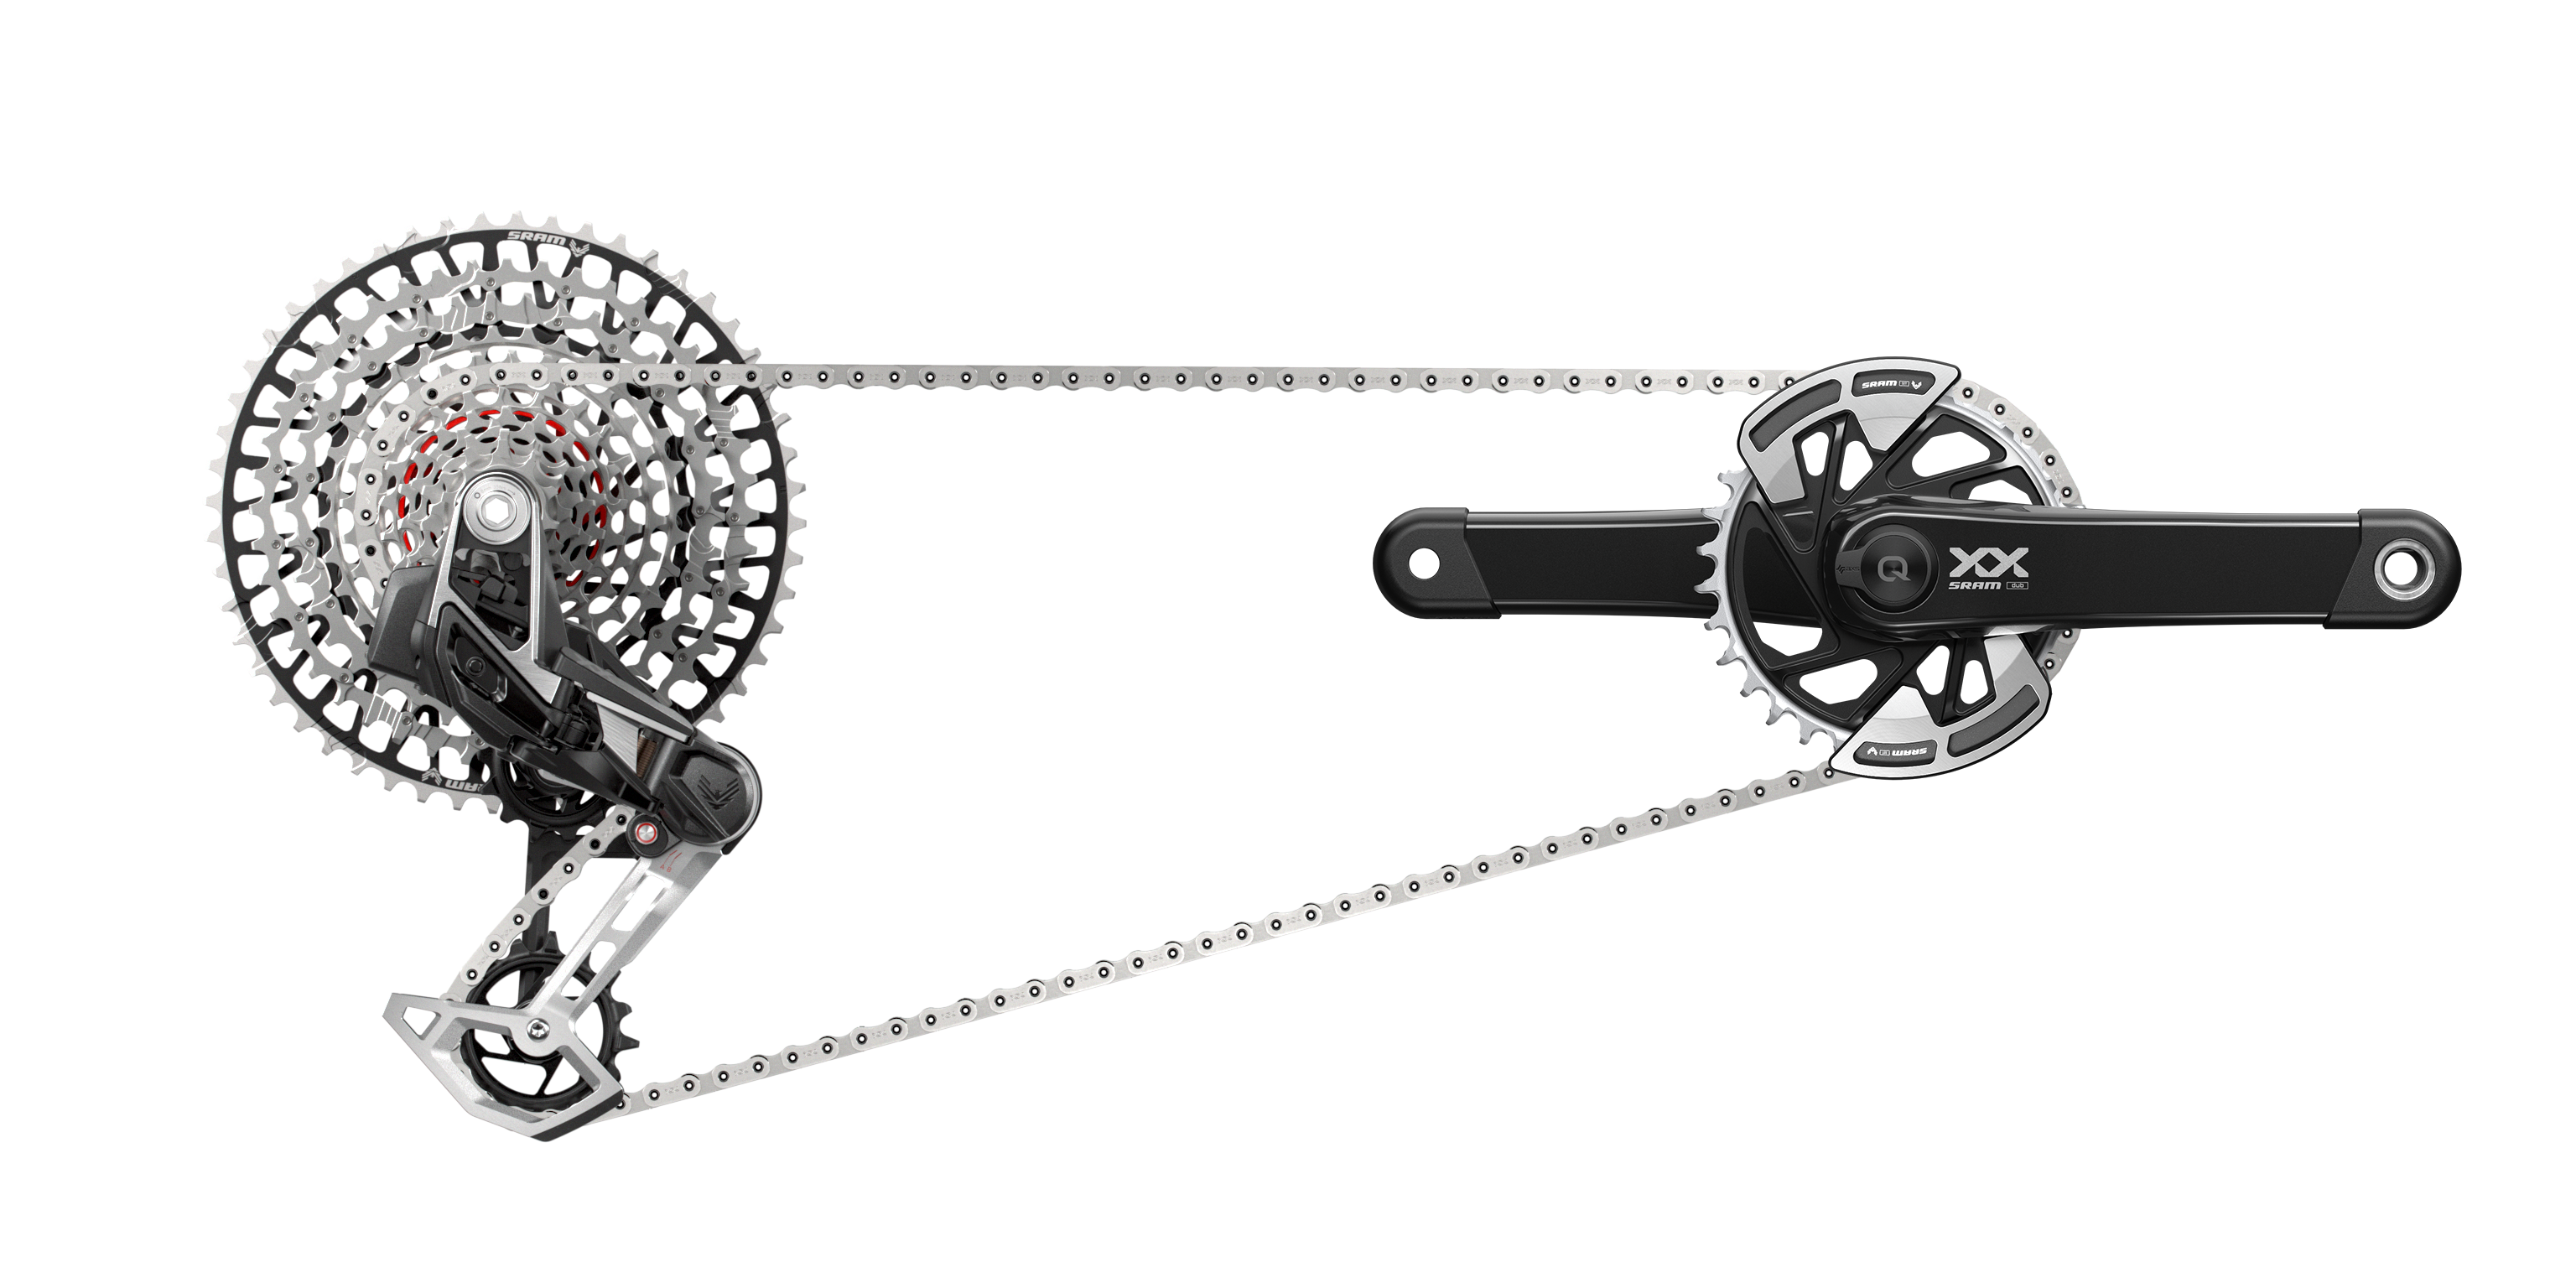 SRAM XX EAGLE T-TYPE AXS GROUPSET WITH POWER METER